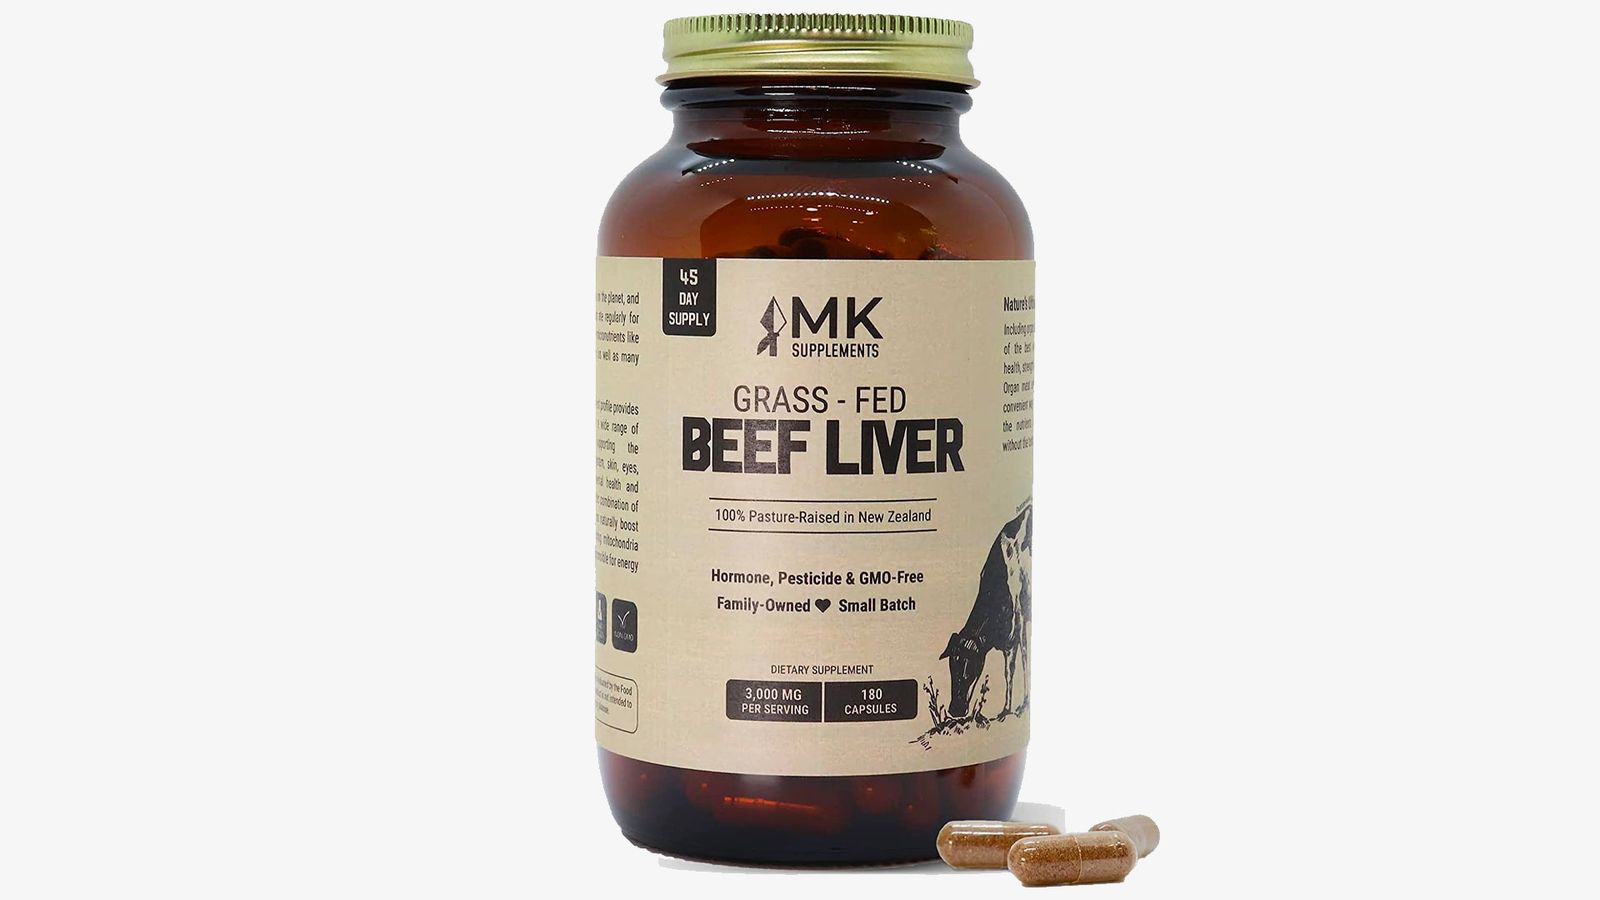 MK Supplements Grass-Fed Beef Liver Capsules product image of a brown container with a gold lid and beige branding.